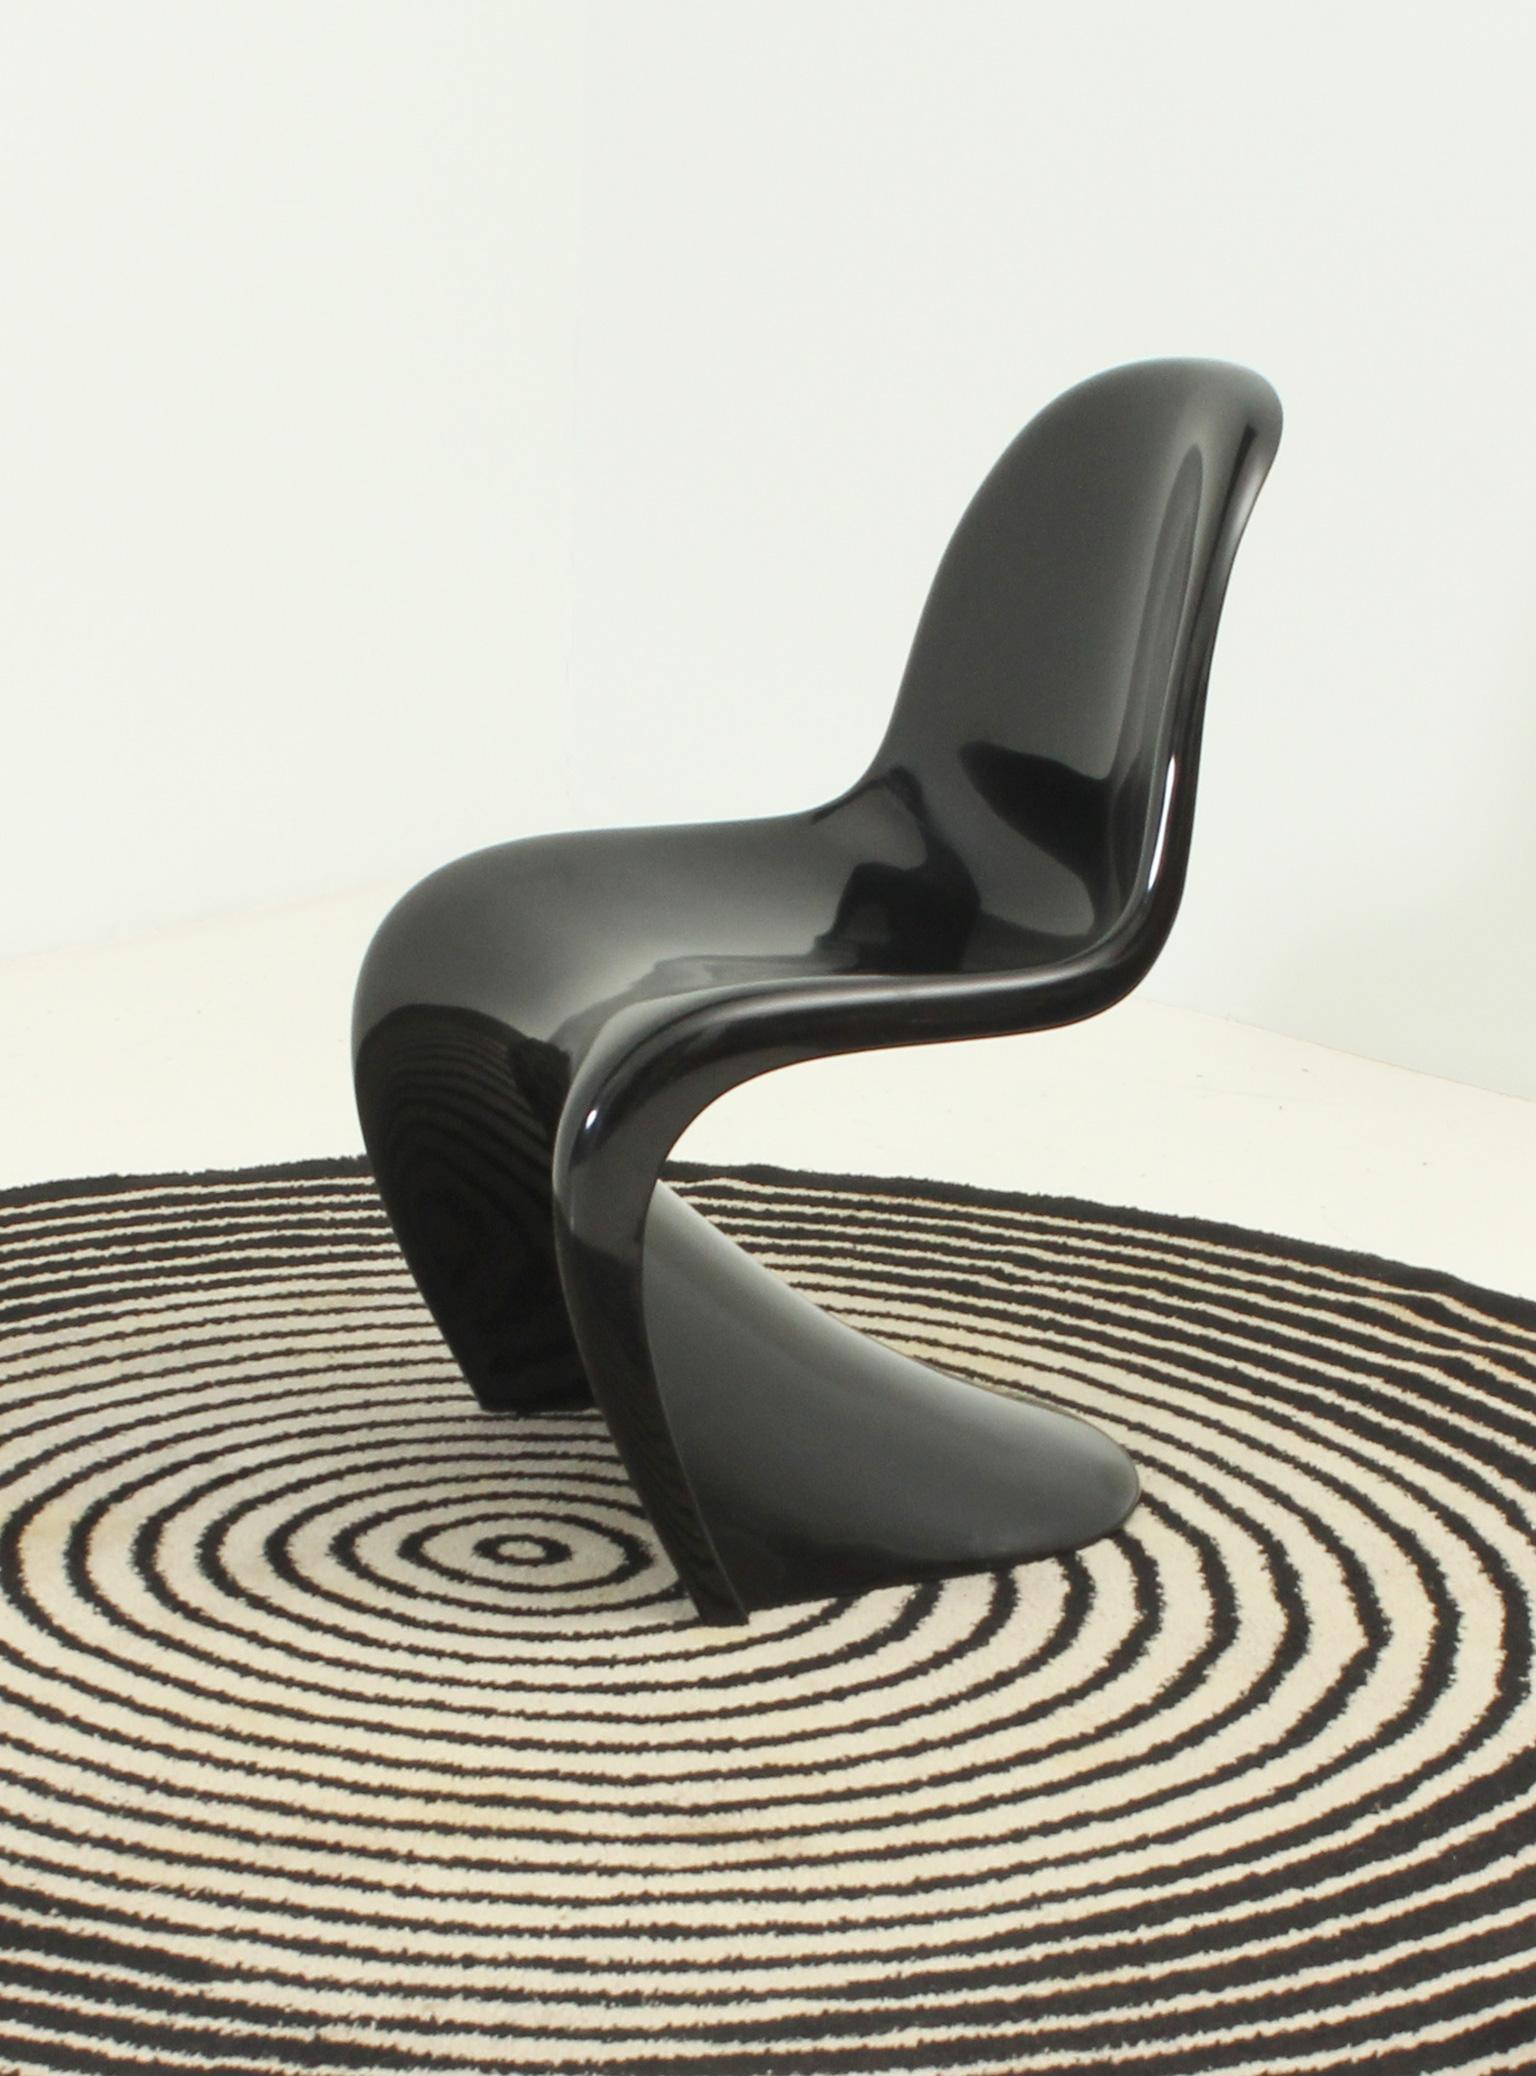 Side chair designed by Verner Panton in 1967 for Herman Miller - Fehlbaum production, Germany. This one is stamped in 1971 in black glossy thermoplastic.